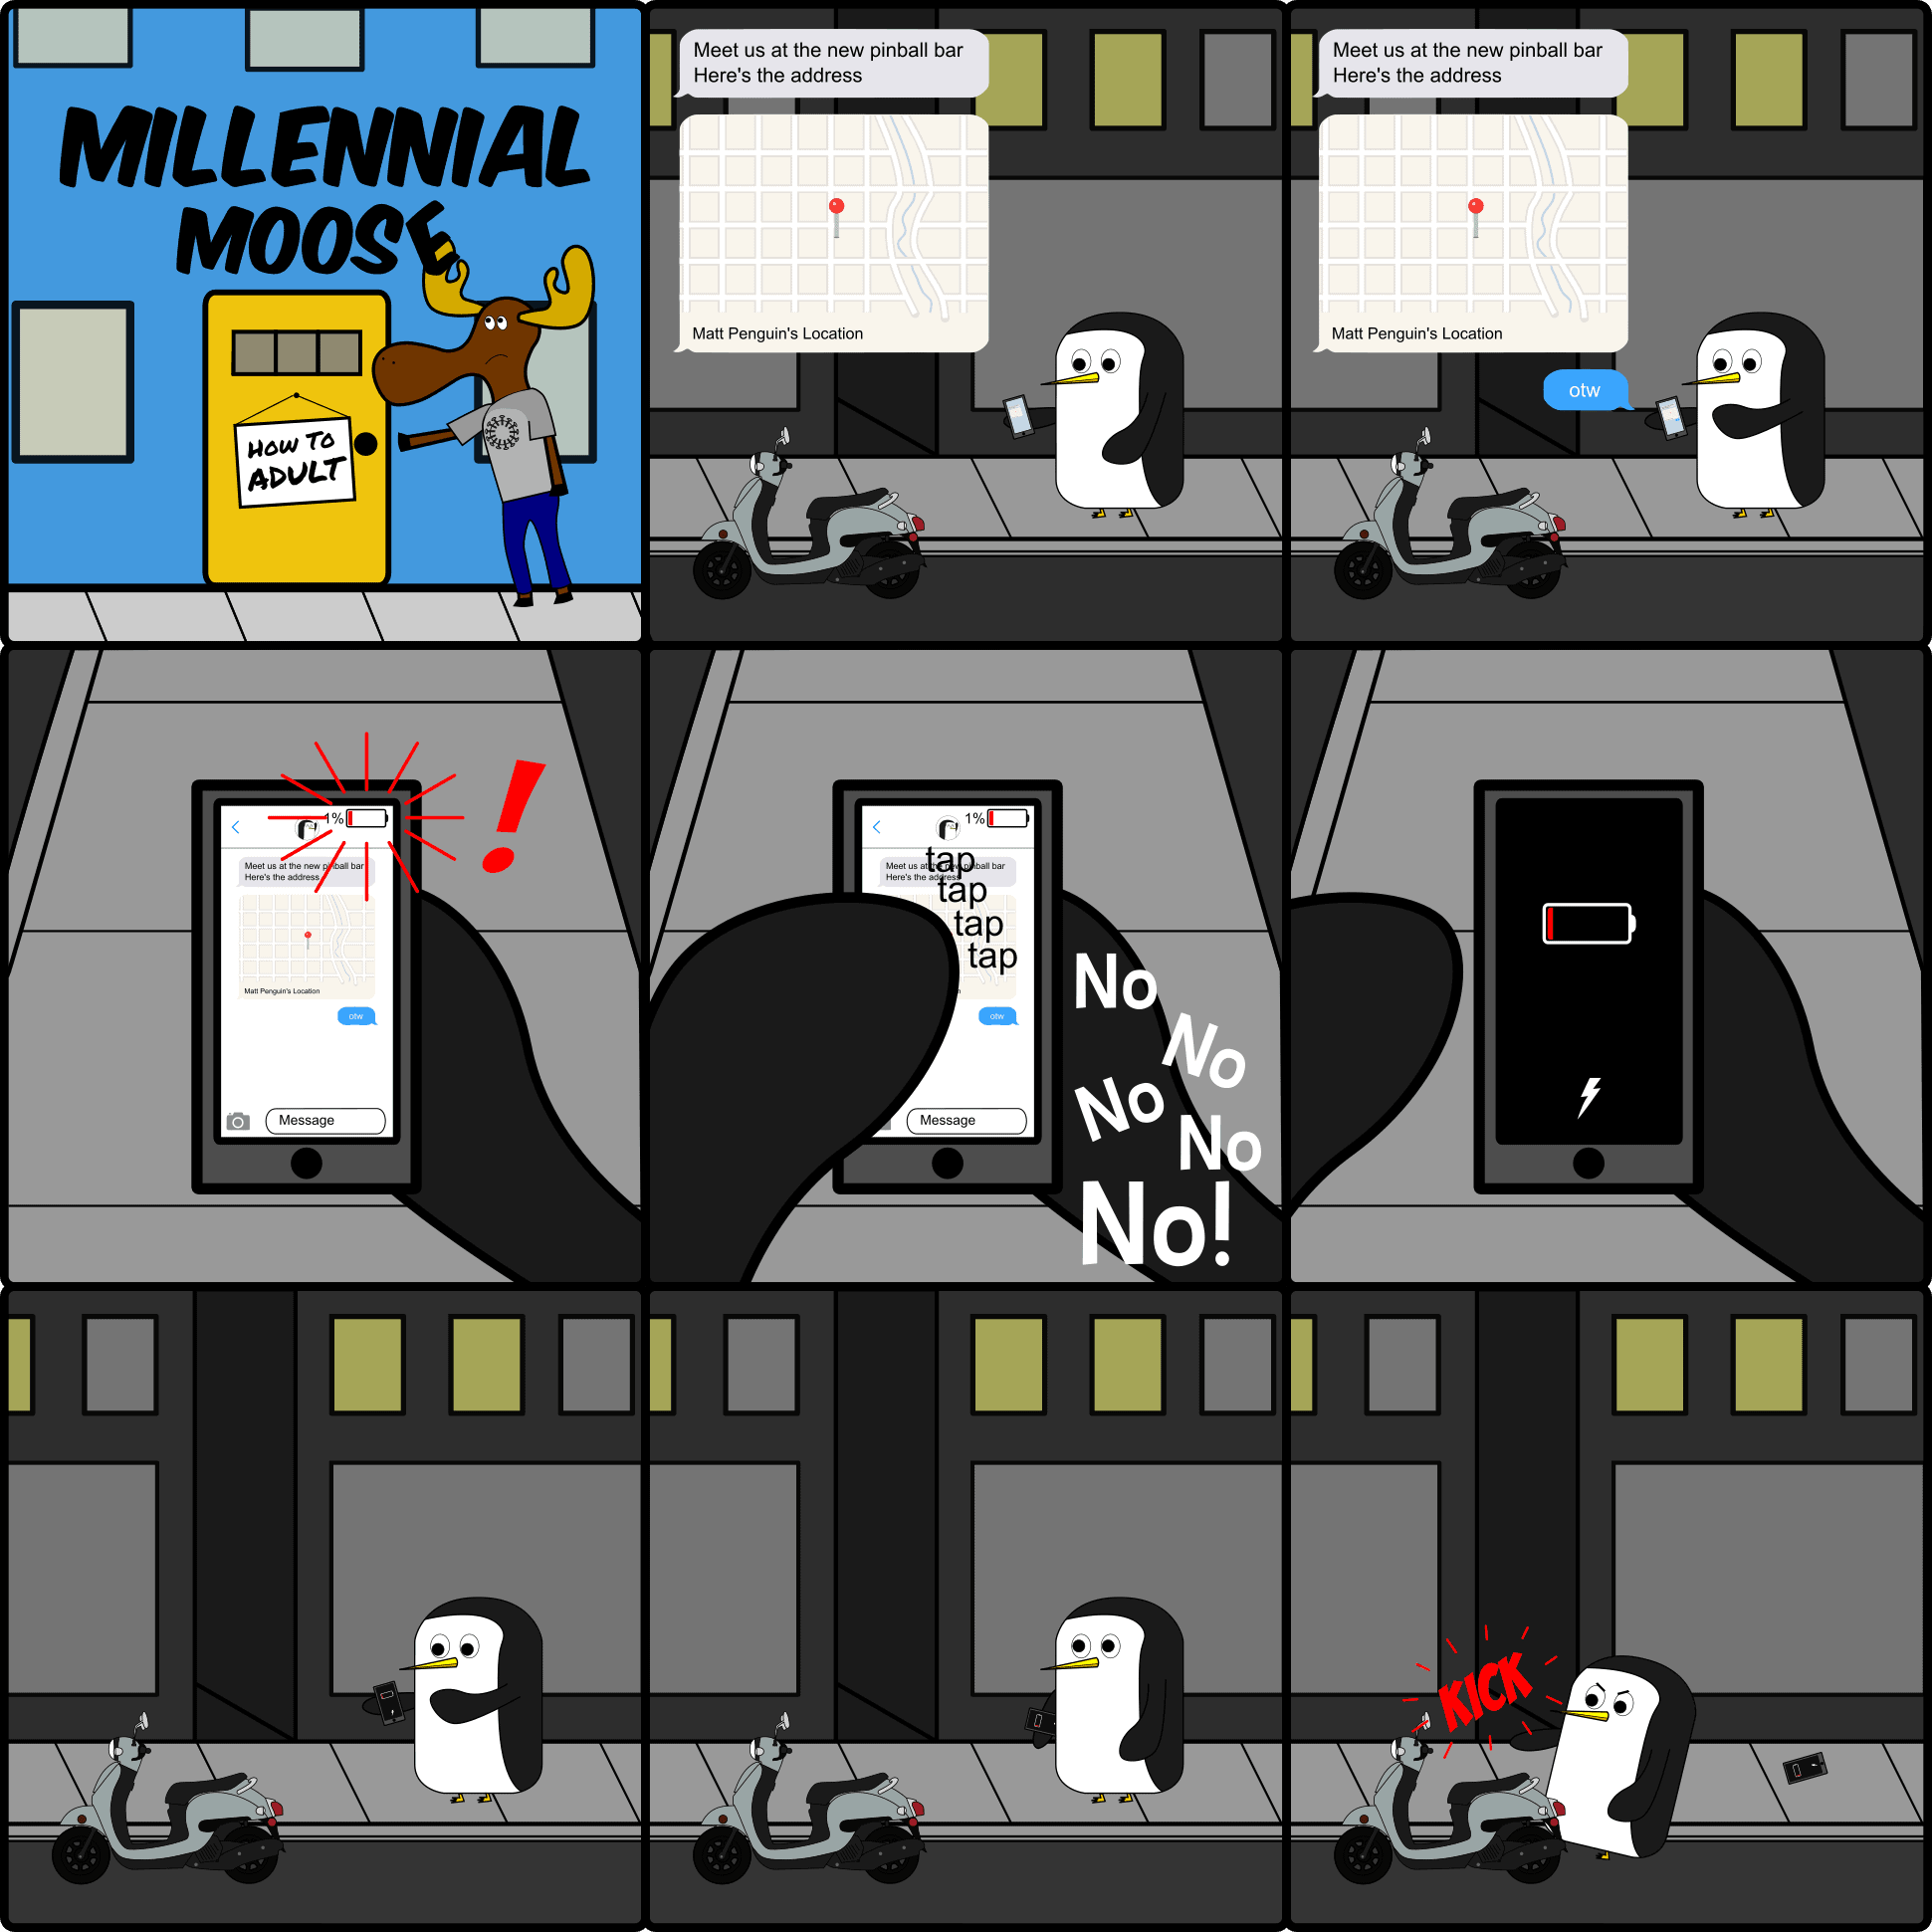 In this Millennial Moose comic, the everyday millennial penguin faces what all Millennials face, a dead cell phone battery. After receiving directions from friends, penguin tries to access the directions only to have the battery on his phone die. That moment is never a fun one so penguin kicks a scooter in frustration.